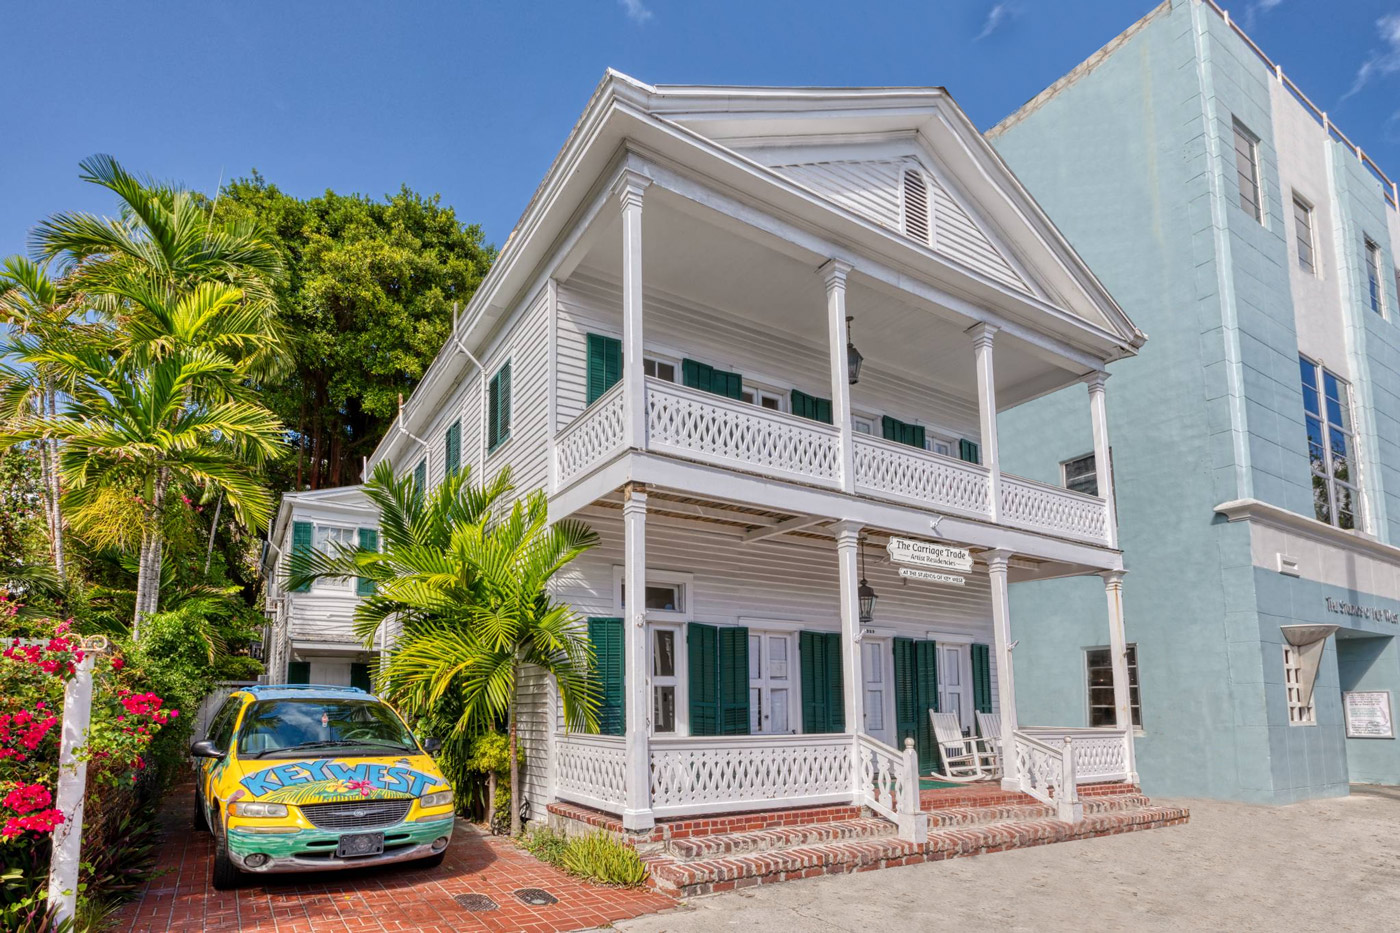 Two story white wooden house with green shutters, porches and a colorful painted car on left.